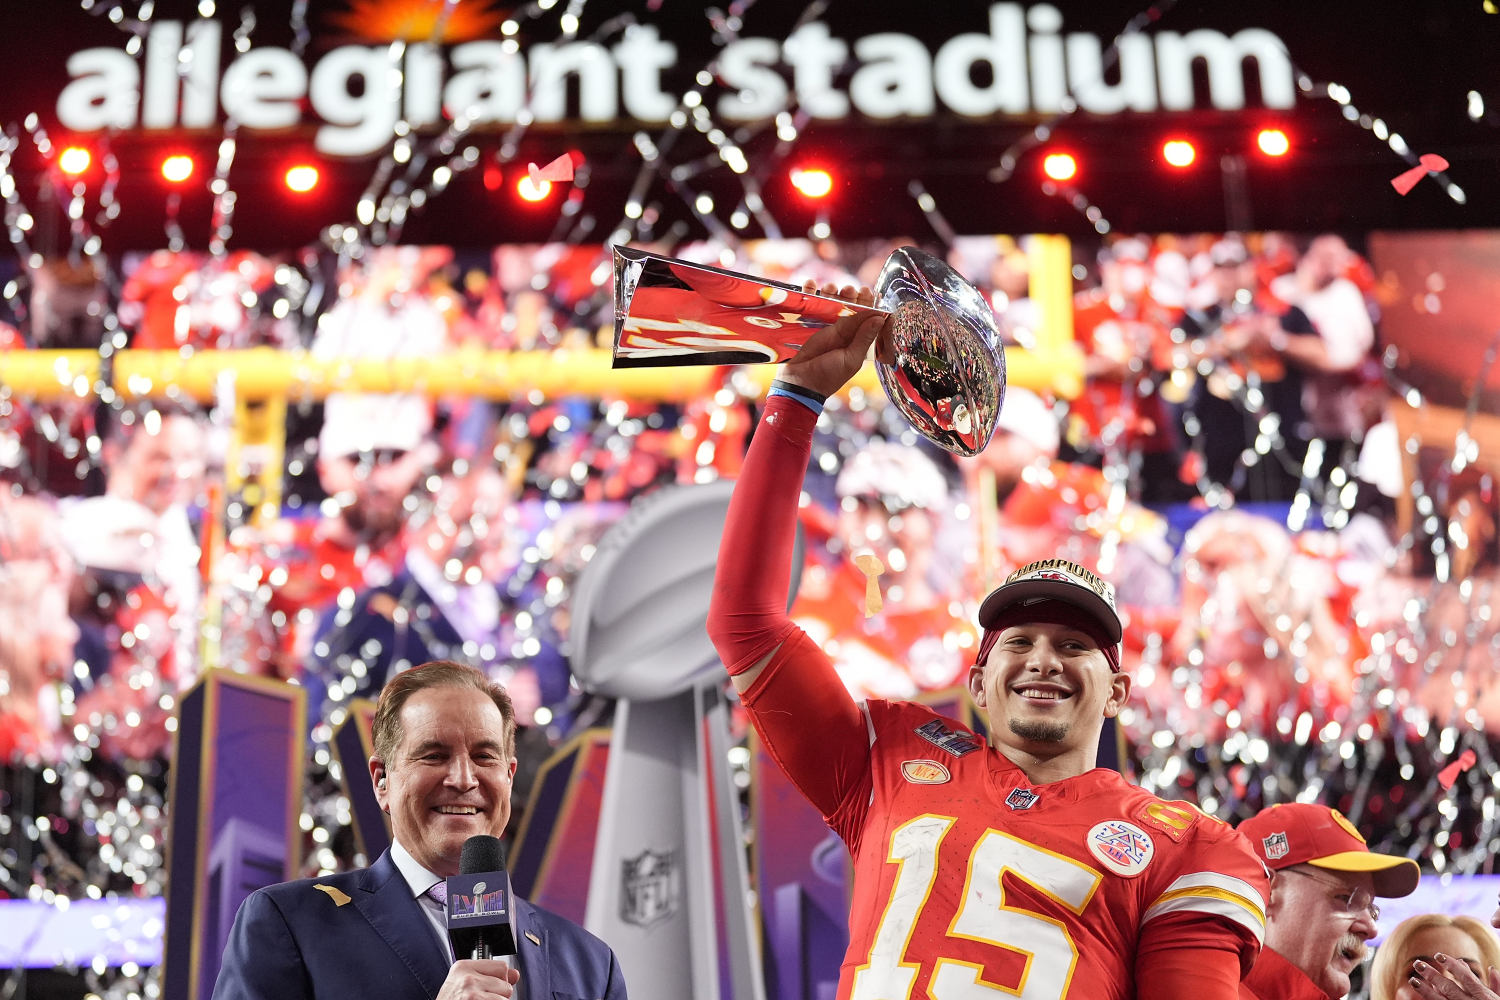 Chiefs win thrilling Super Bowl in overtime, beating 49ers 25-22